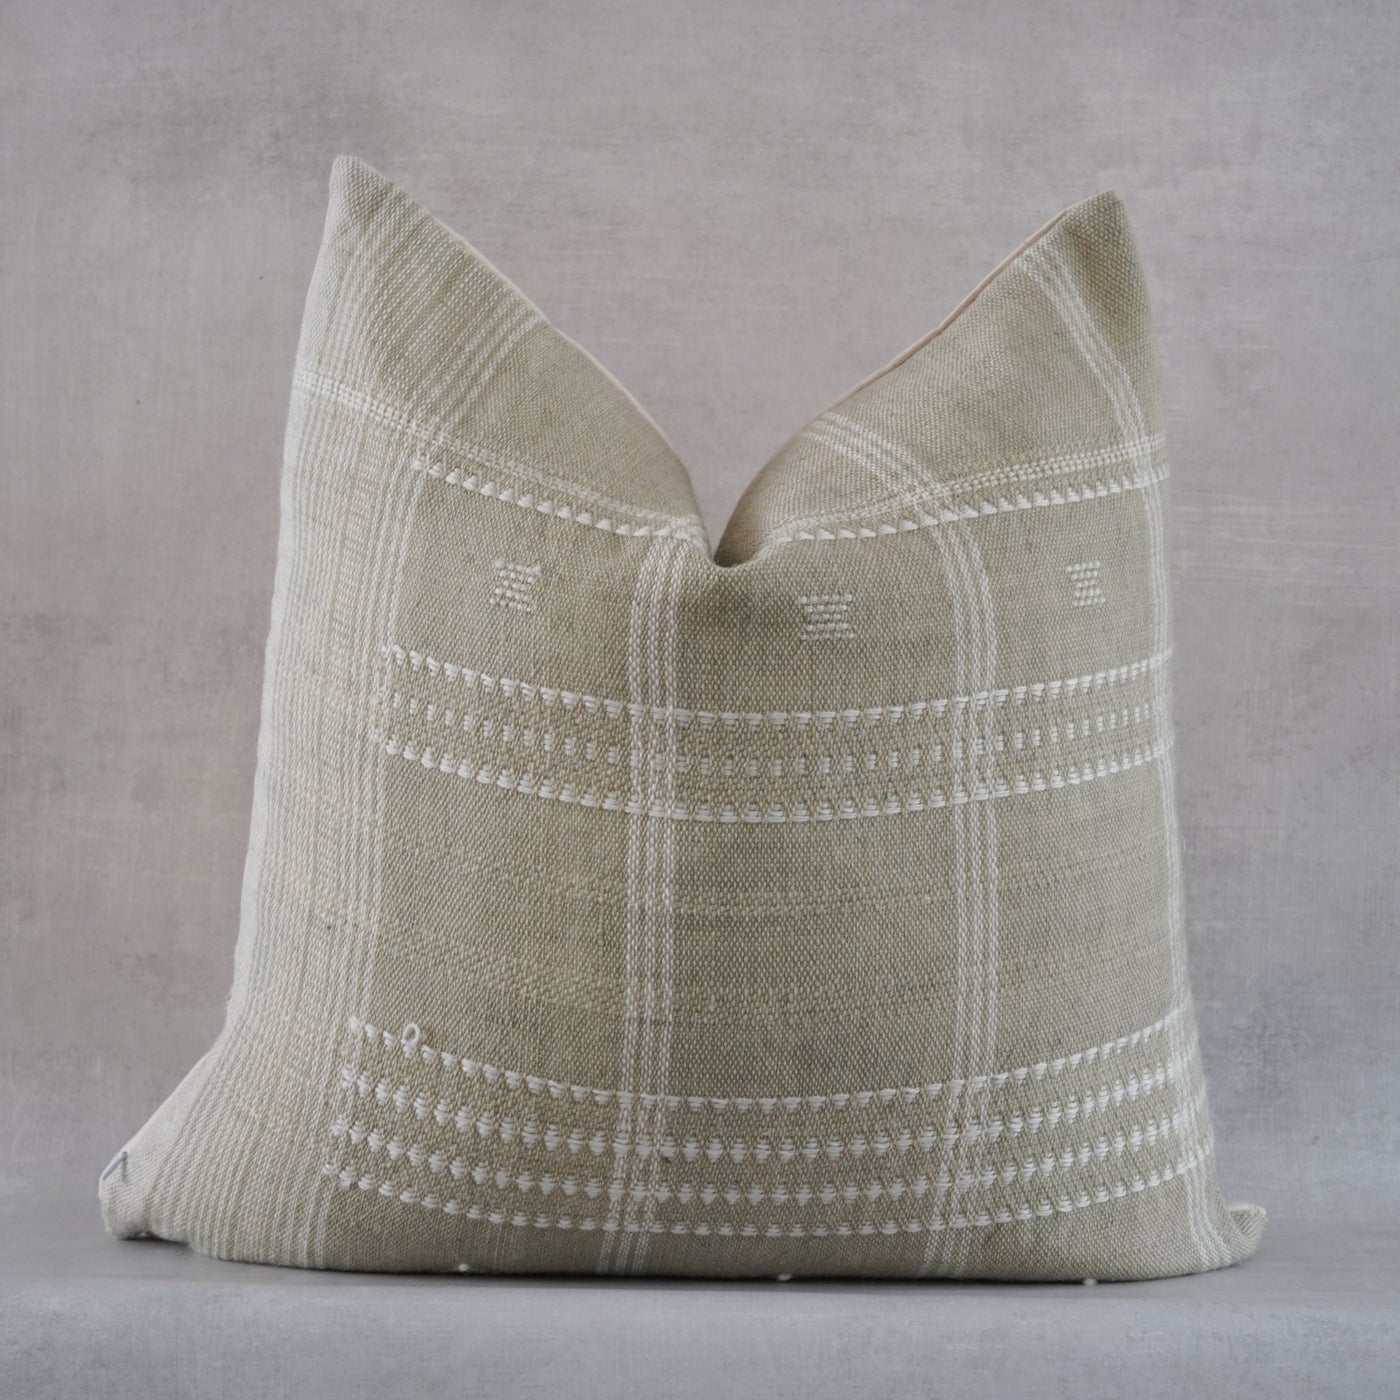 TOMI - Indian Wool Throw Pillow Cover - Sweet Water Decor - Pillow Cover